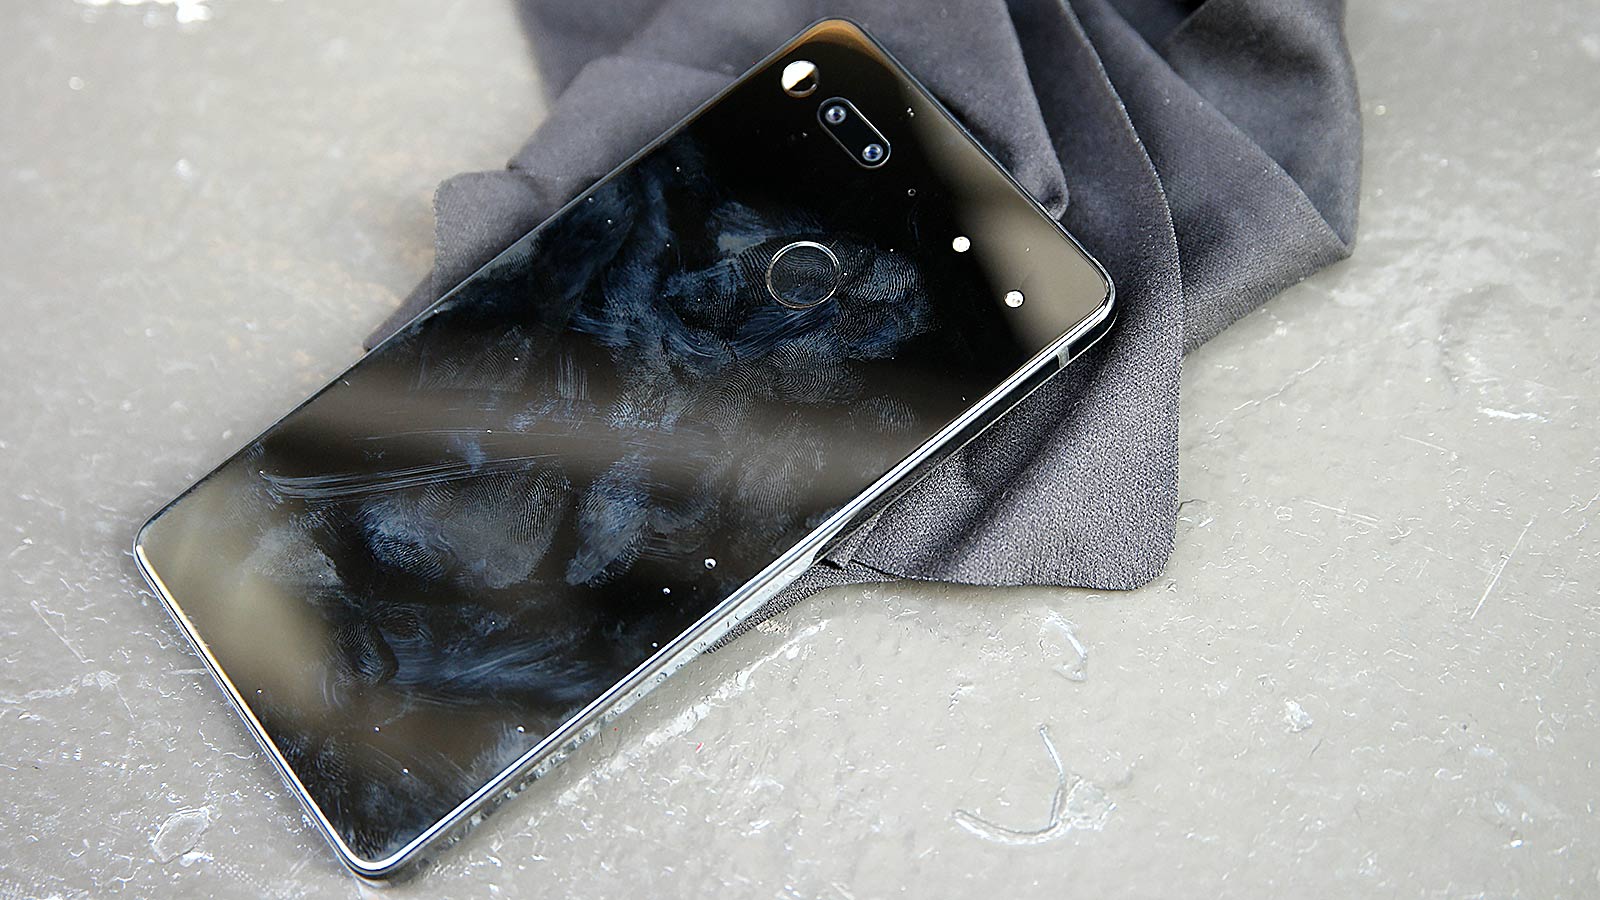 The Essential Phone: Gizmodo Hands-On